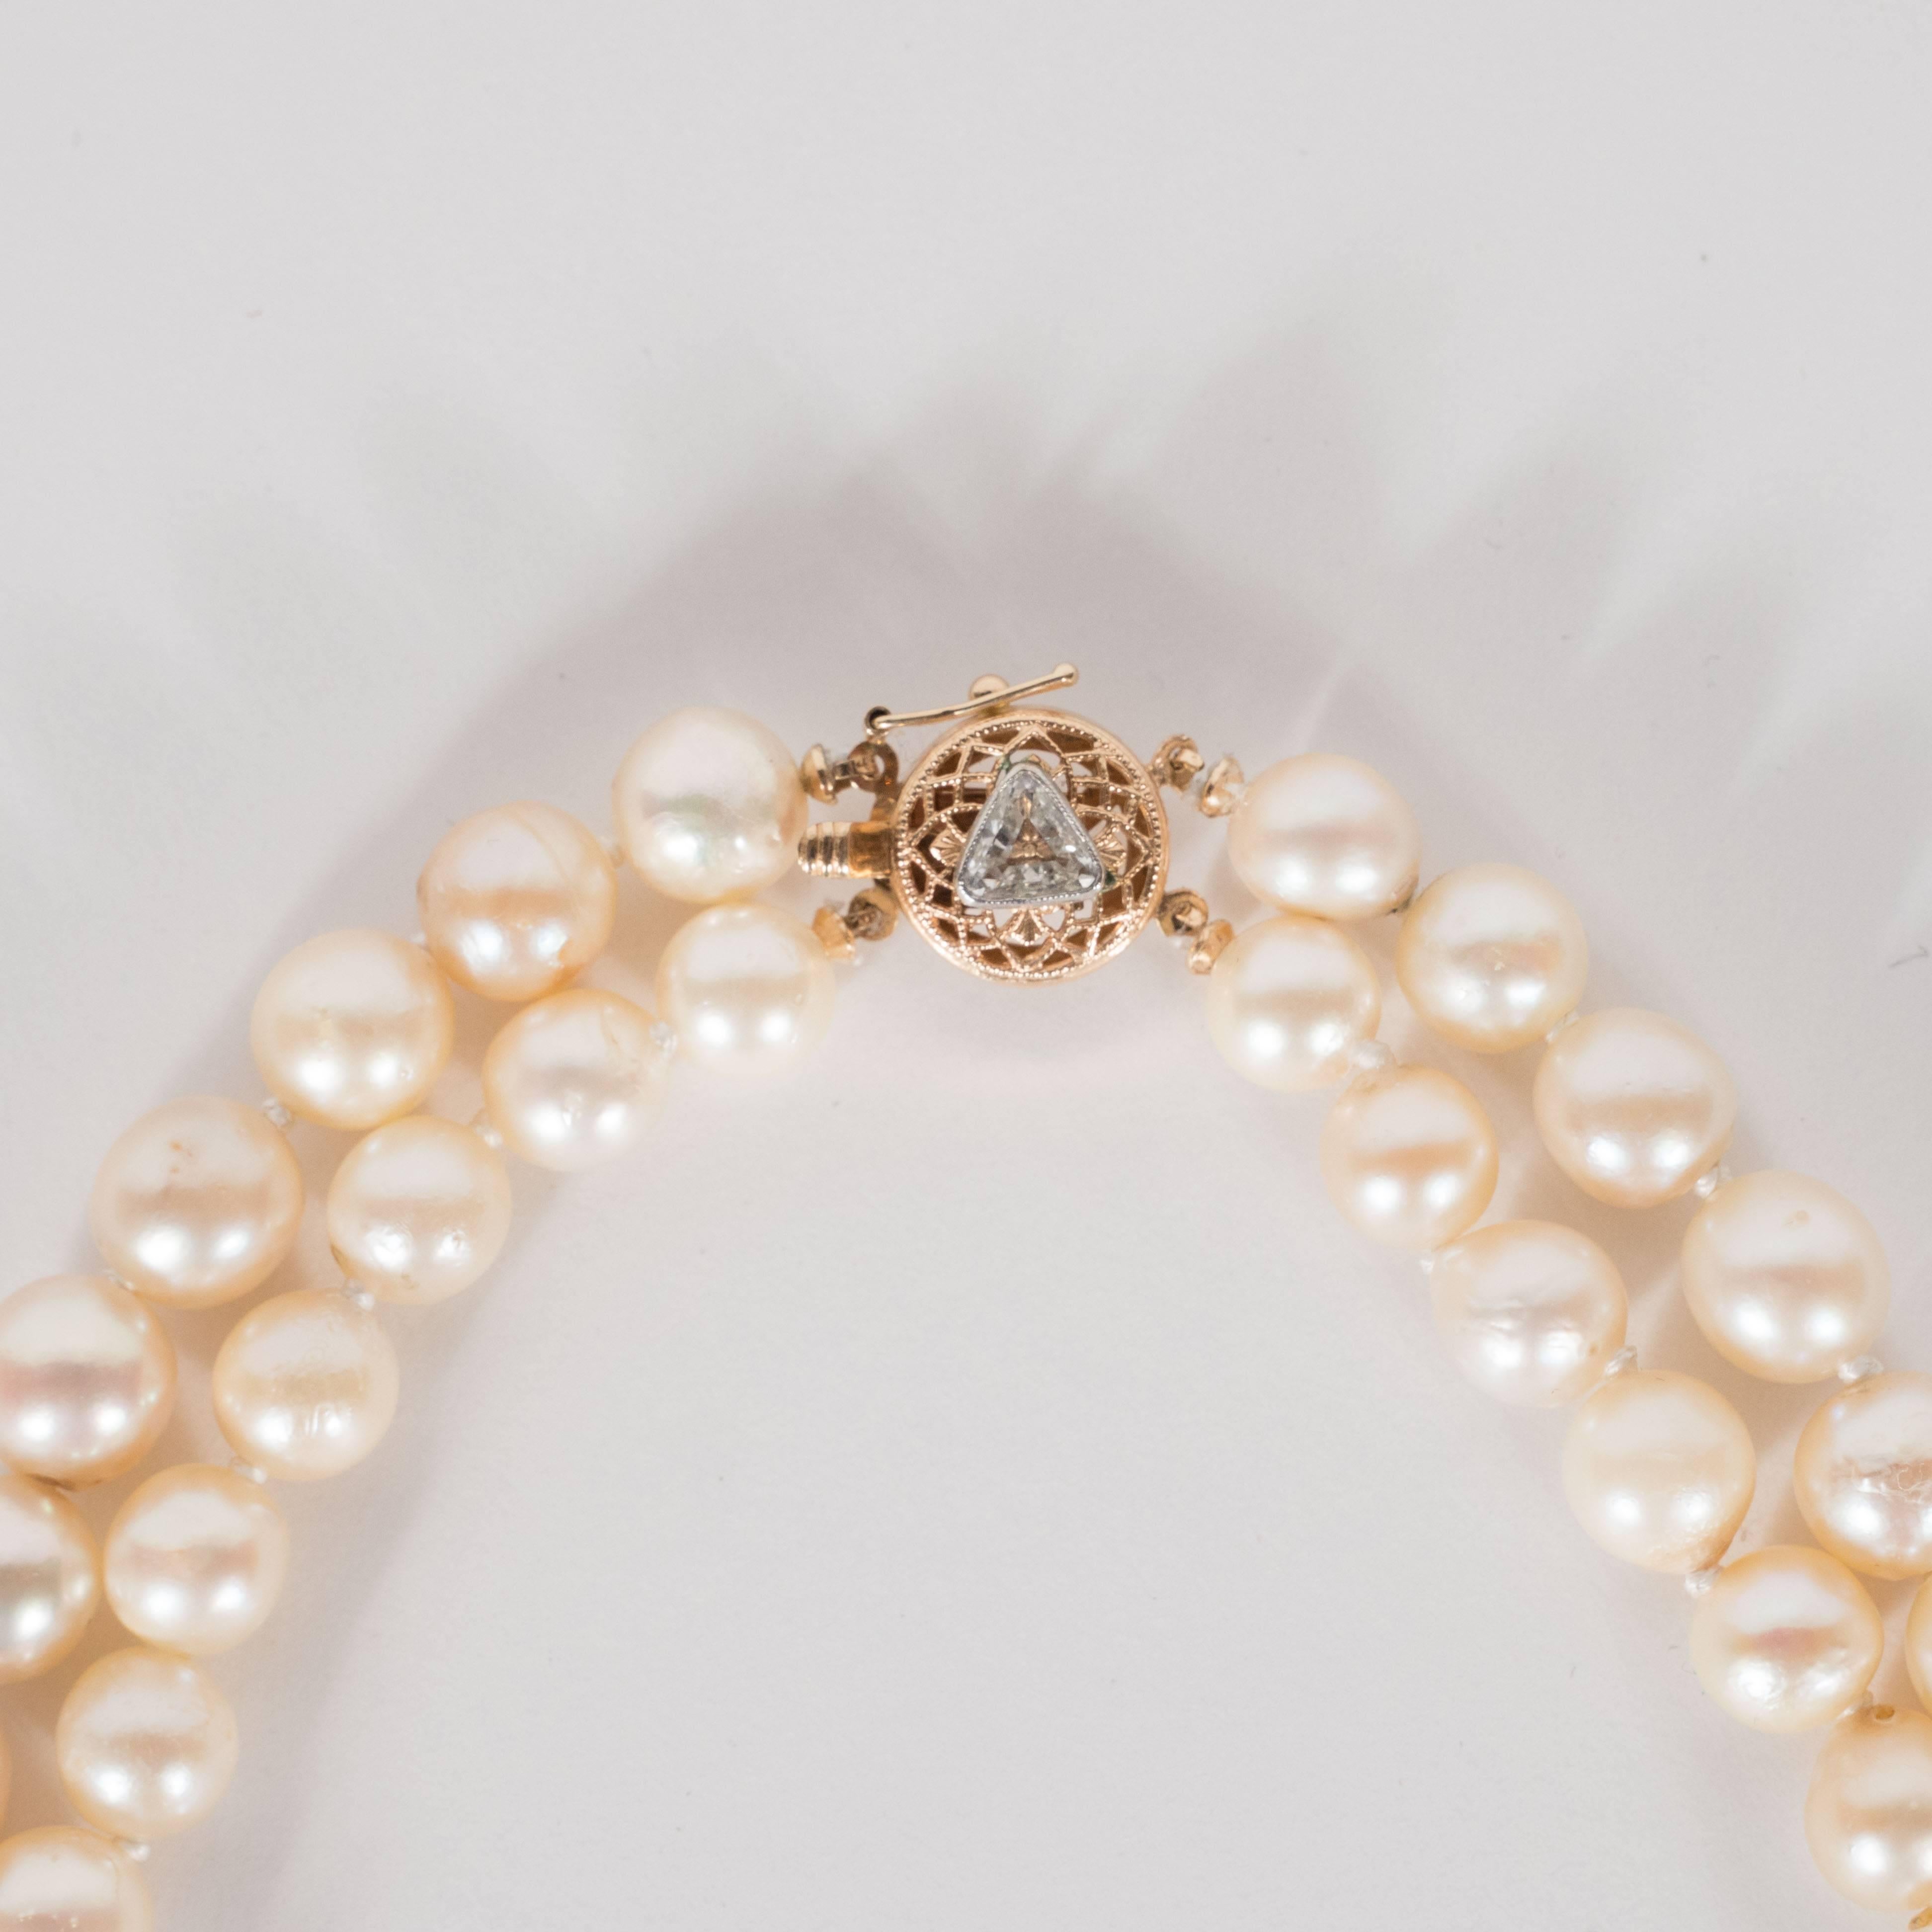 Modernist Graduated Baroque Pearl Choker with Gold Filigree and Trillion Diamond Clasp